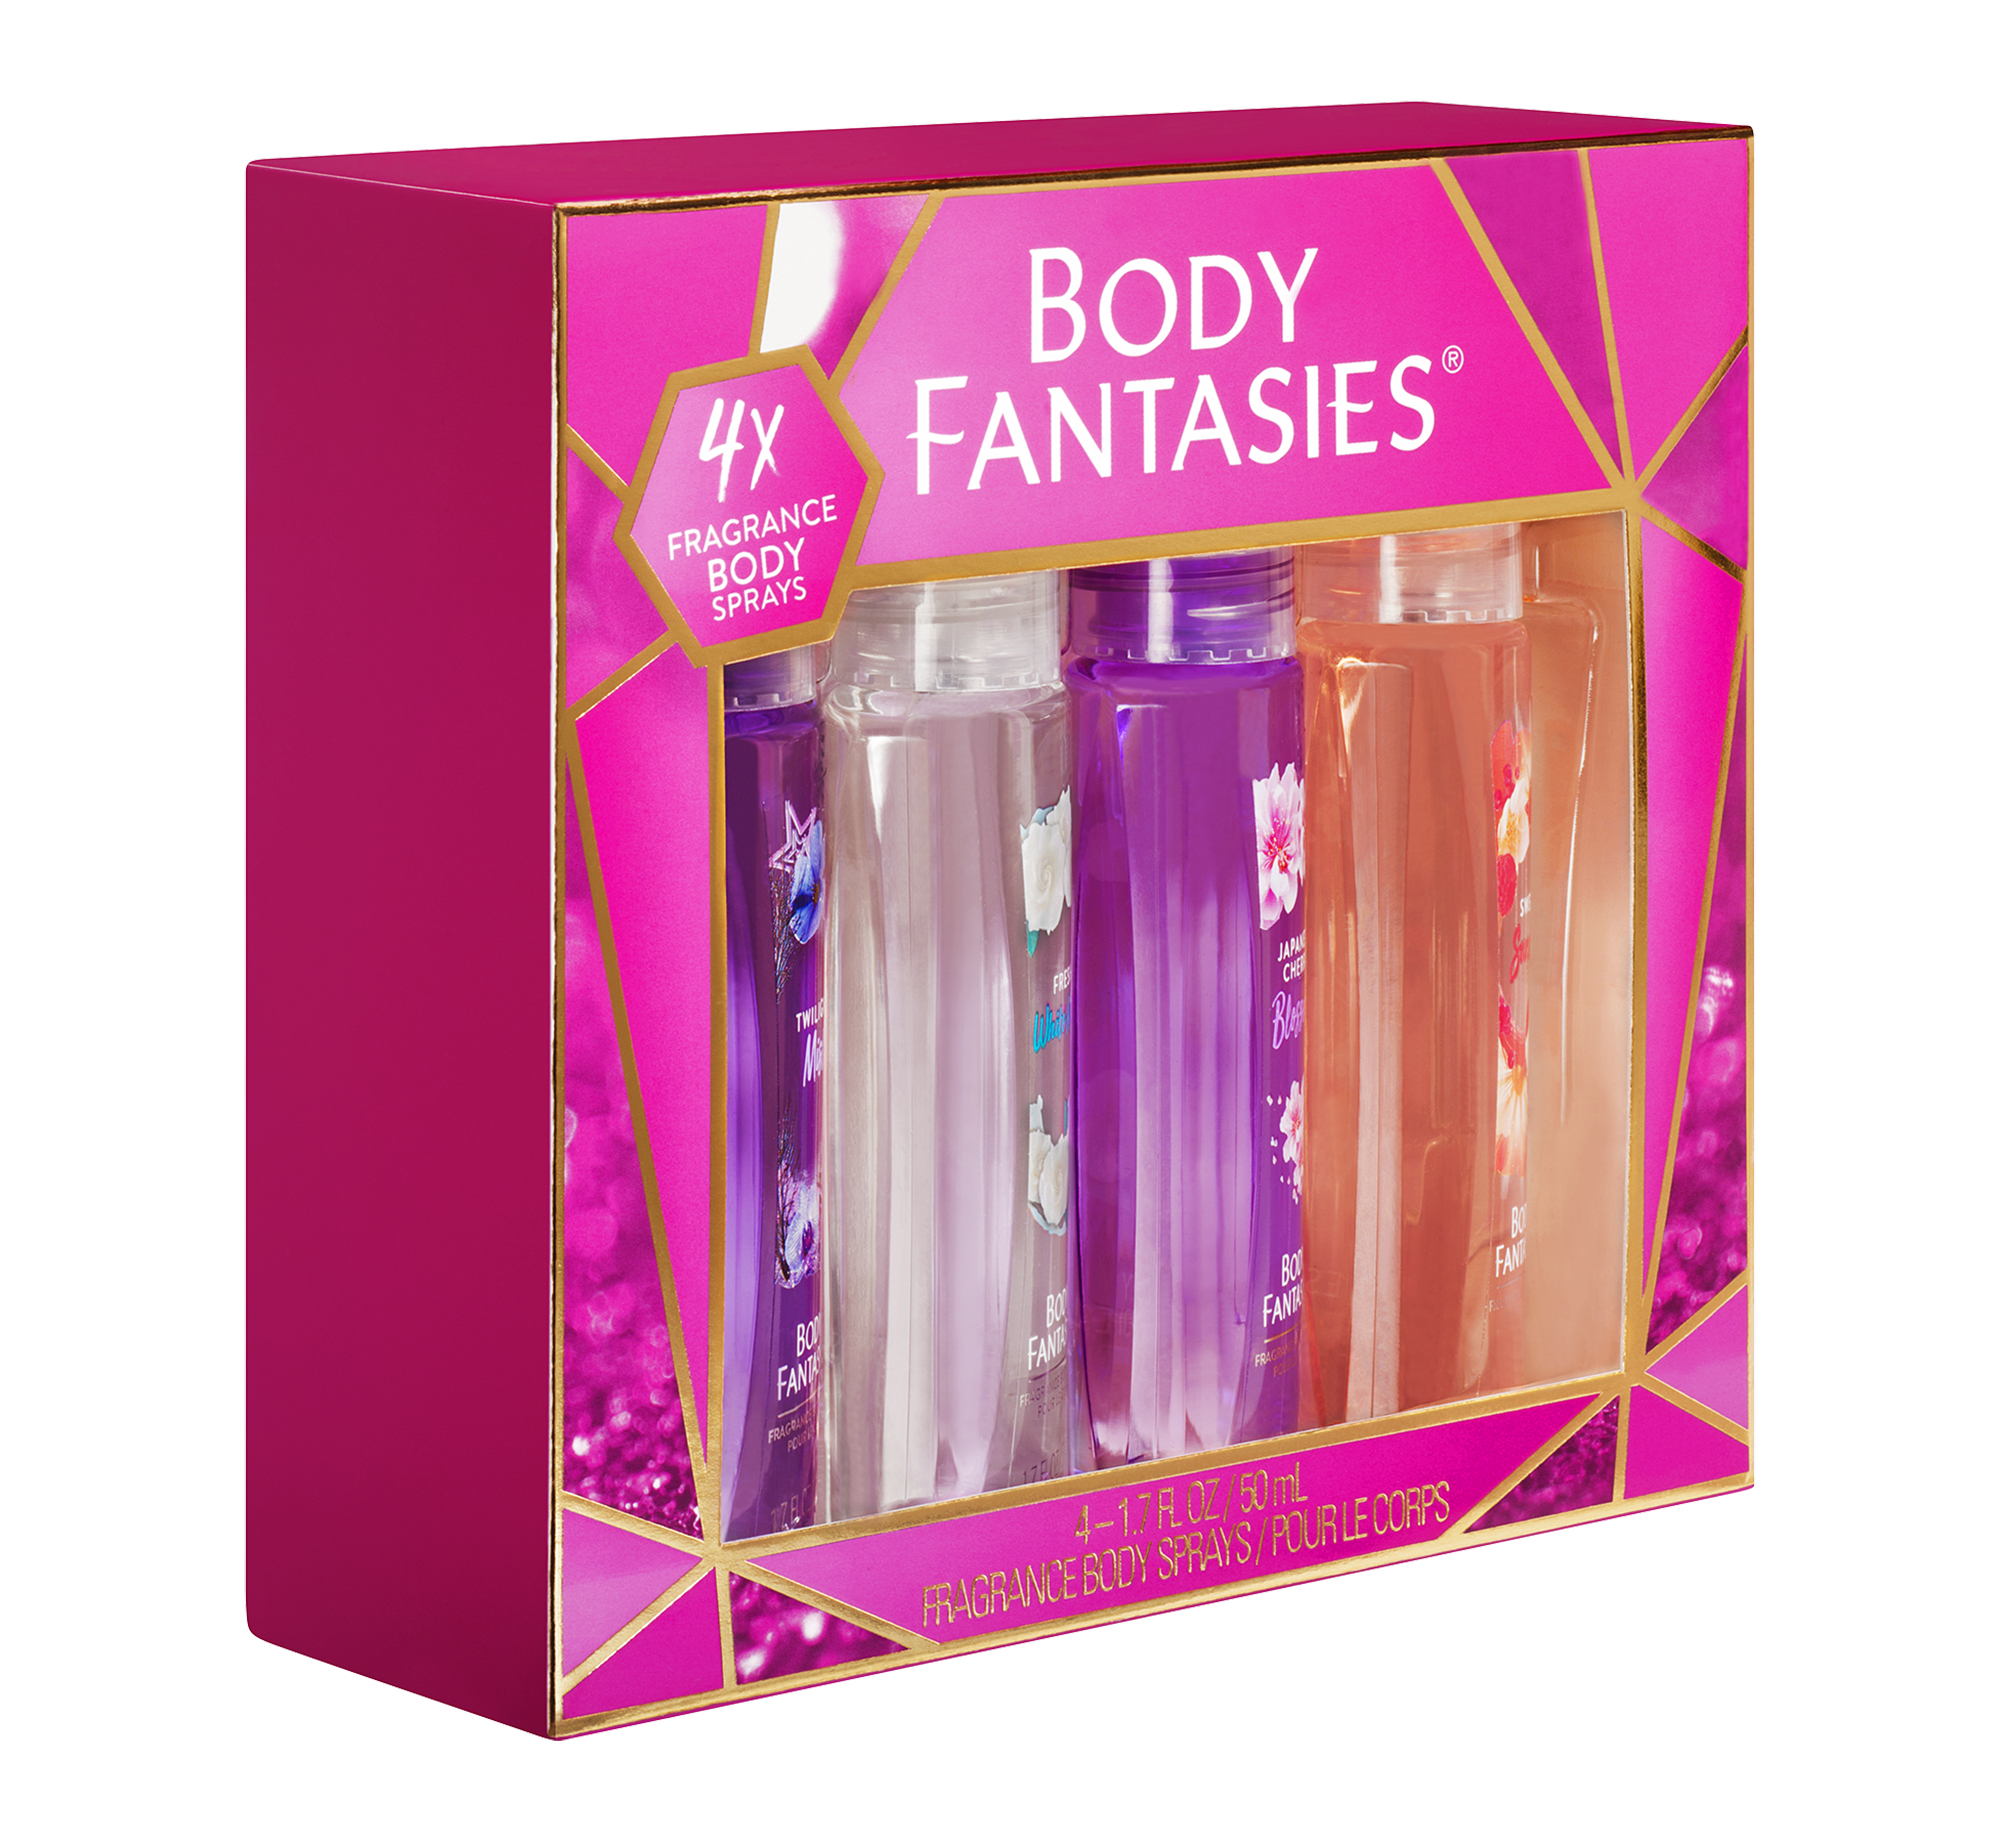 Body Fantasies Signature Fragrance Body Spray Gift Set for Women, 1.7 fl oz, 4 Count - image 3 of 6